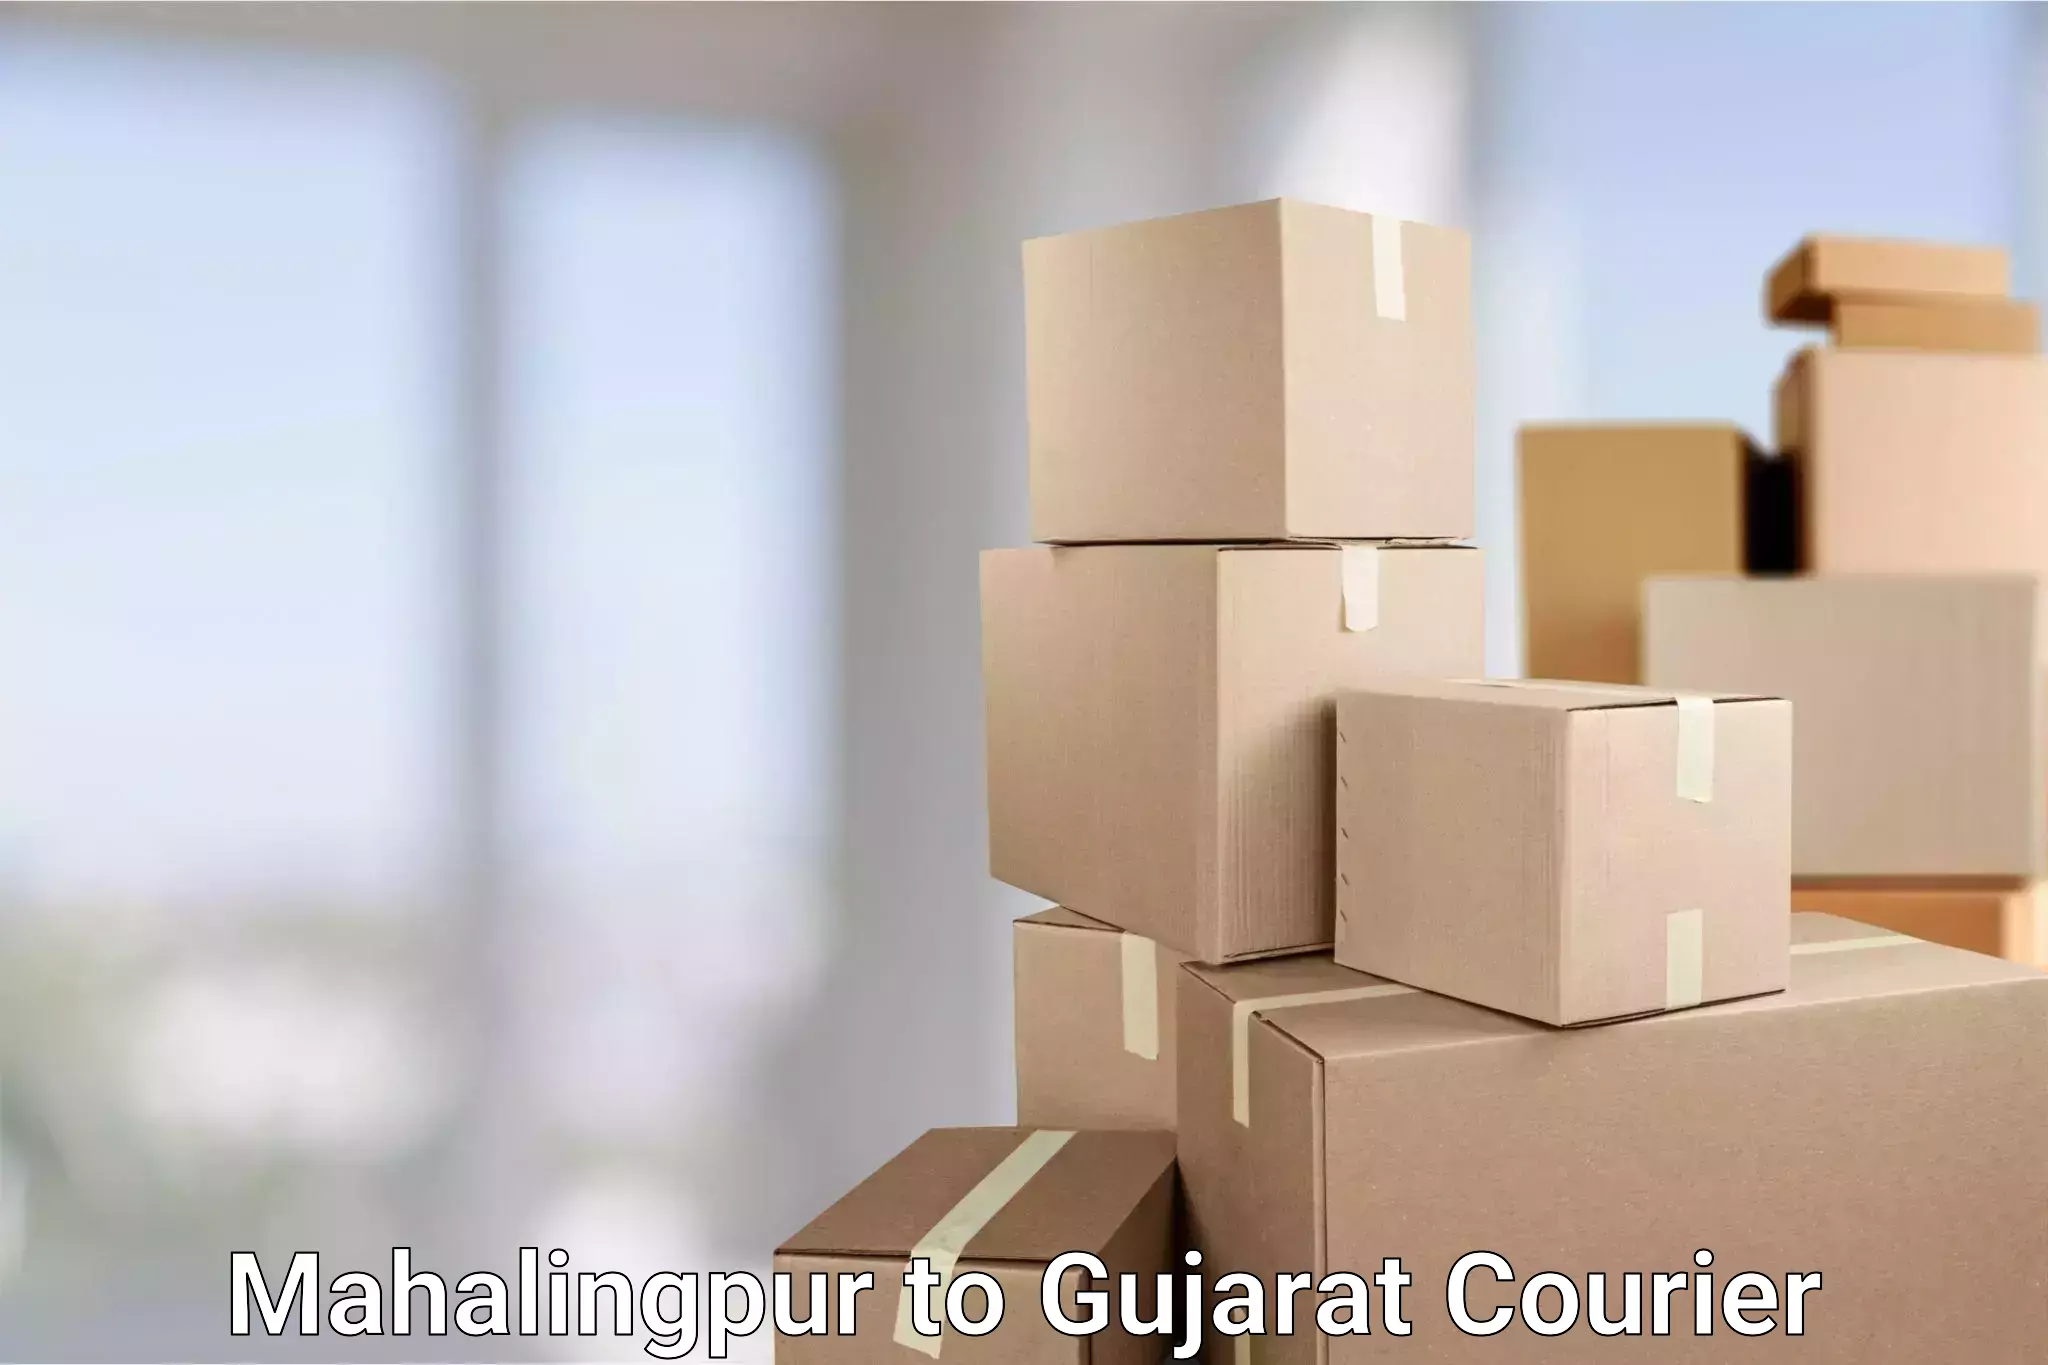 Efficient parcel service Mahalingpur to Anand